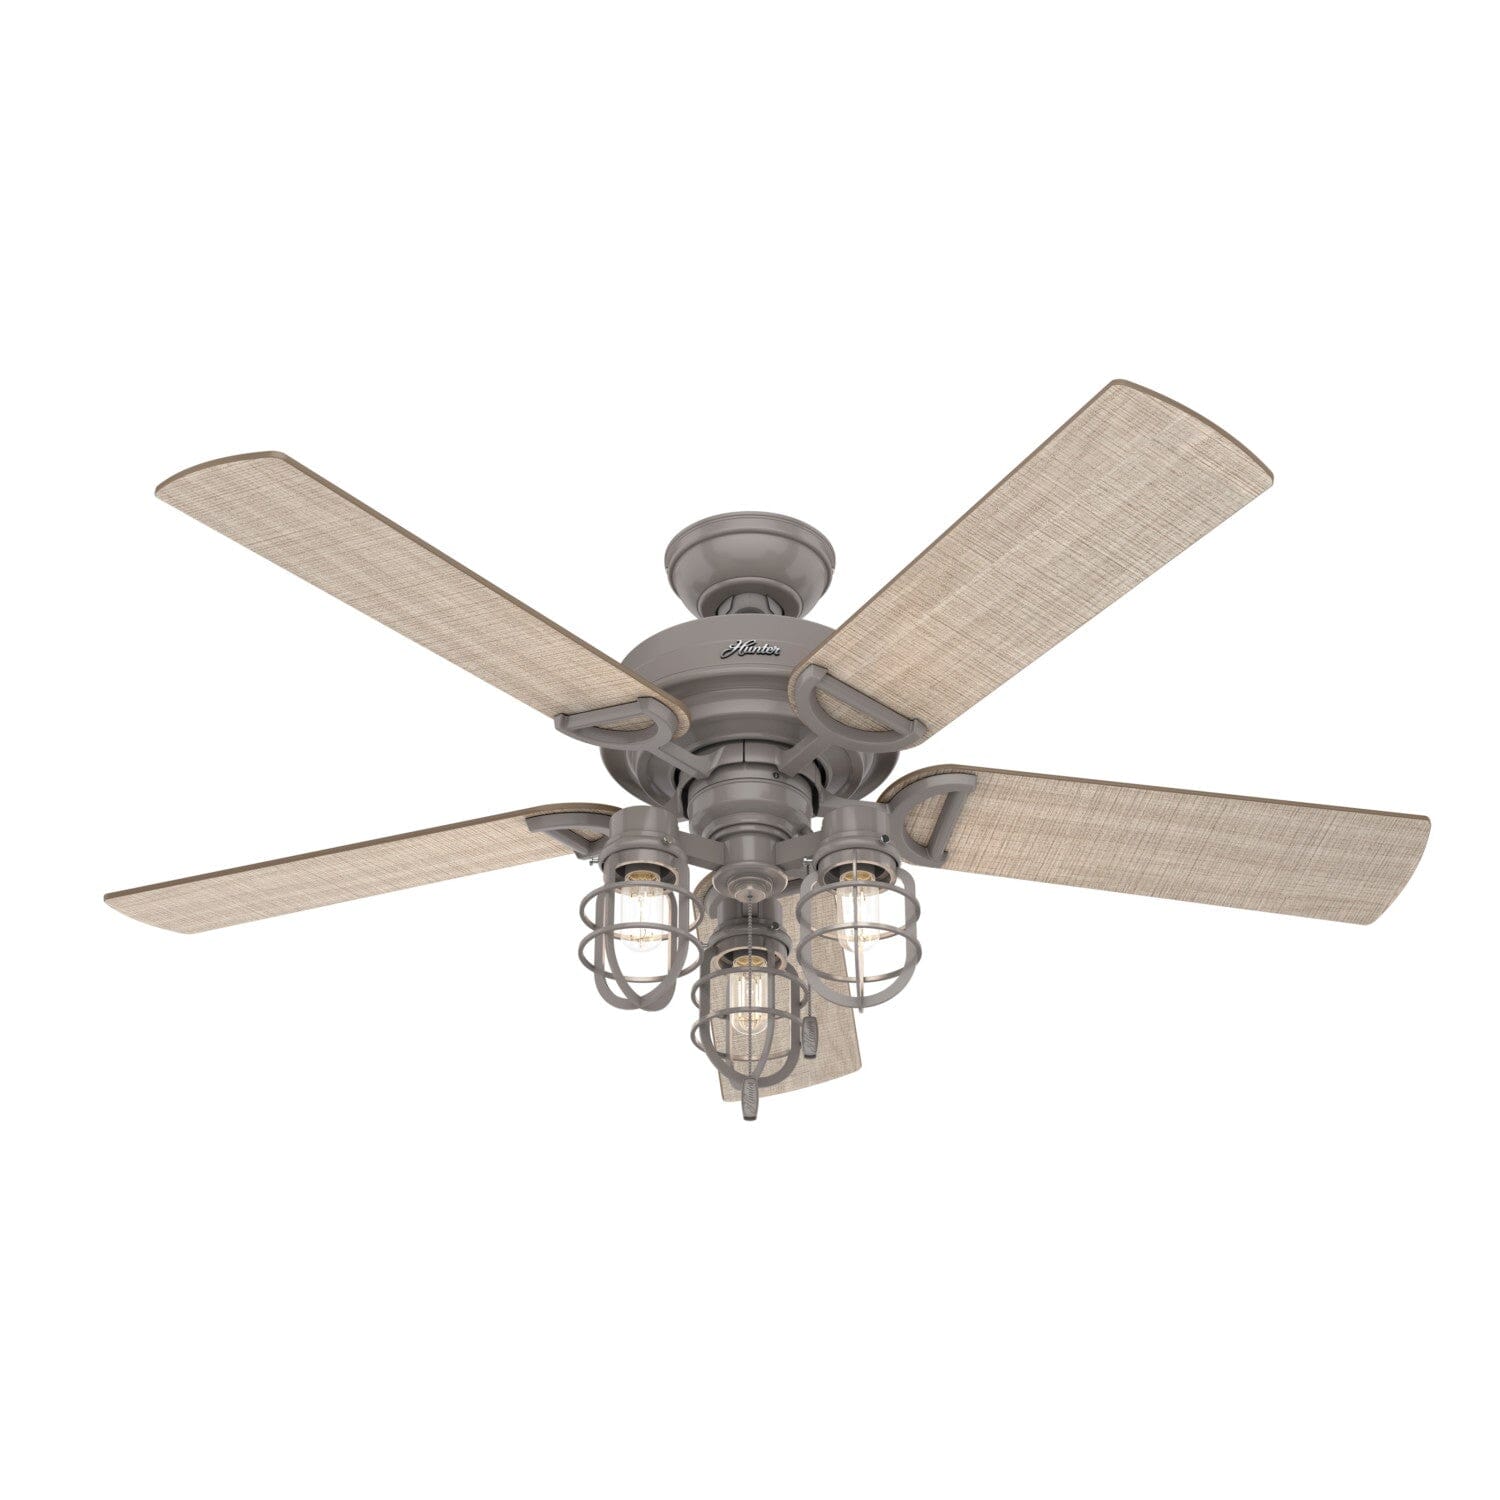 Starklake Outdoor With Led Light 52 Inch Ceiling Fan Hunter